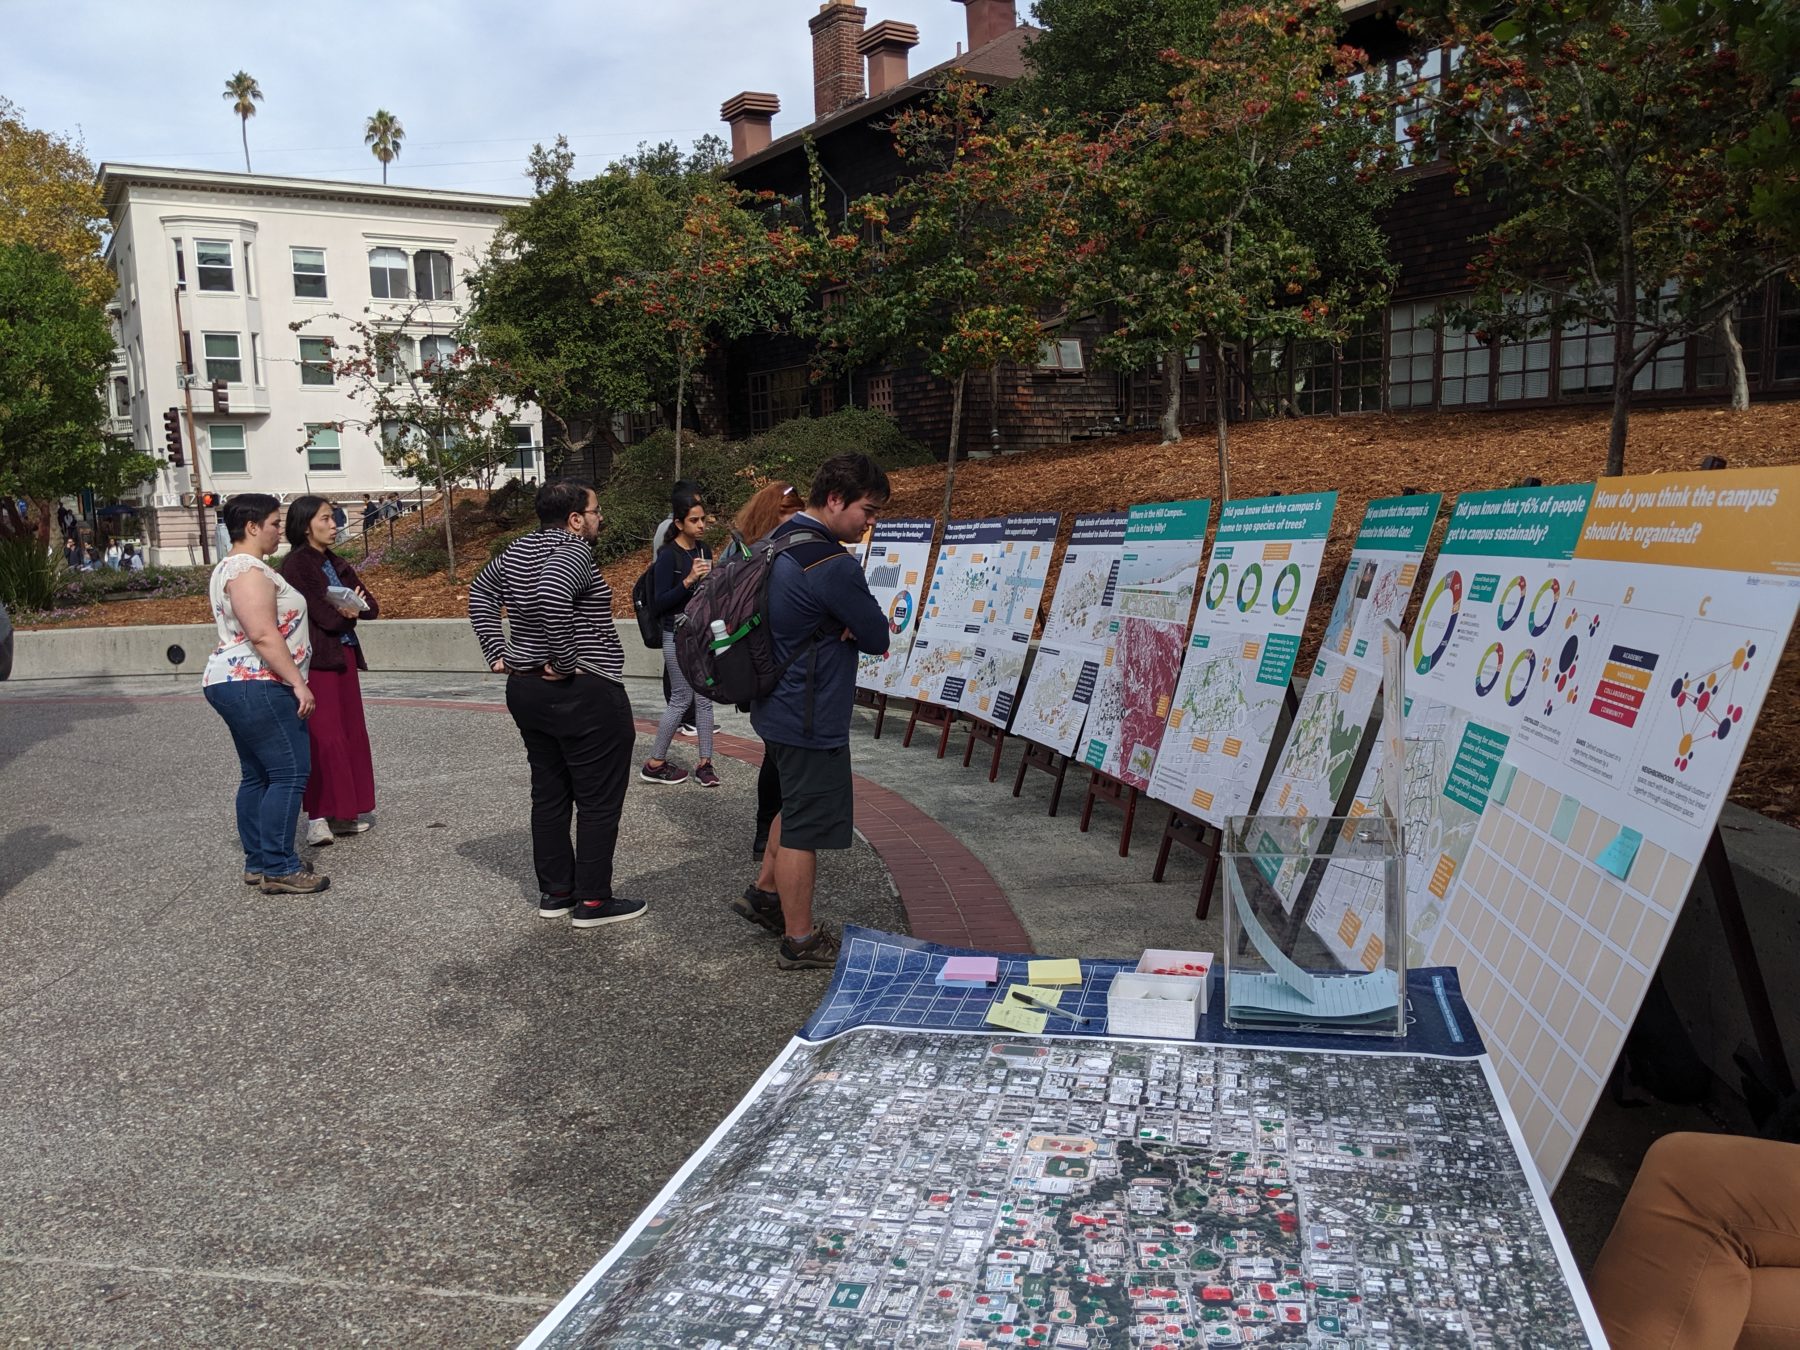 People looking at information graphic boards on a main campus thoroughfare